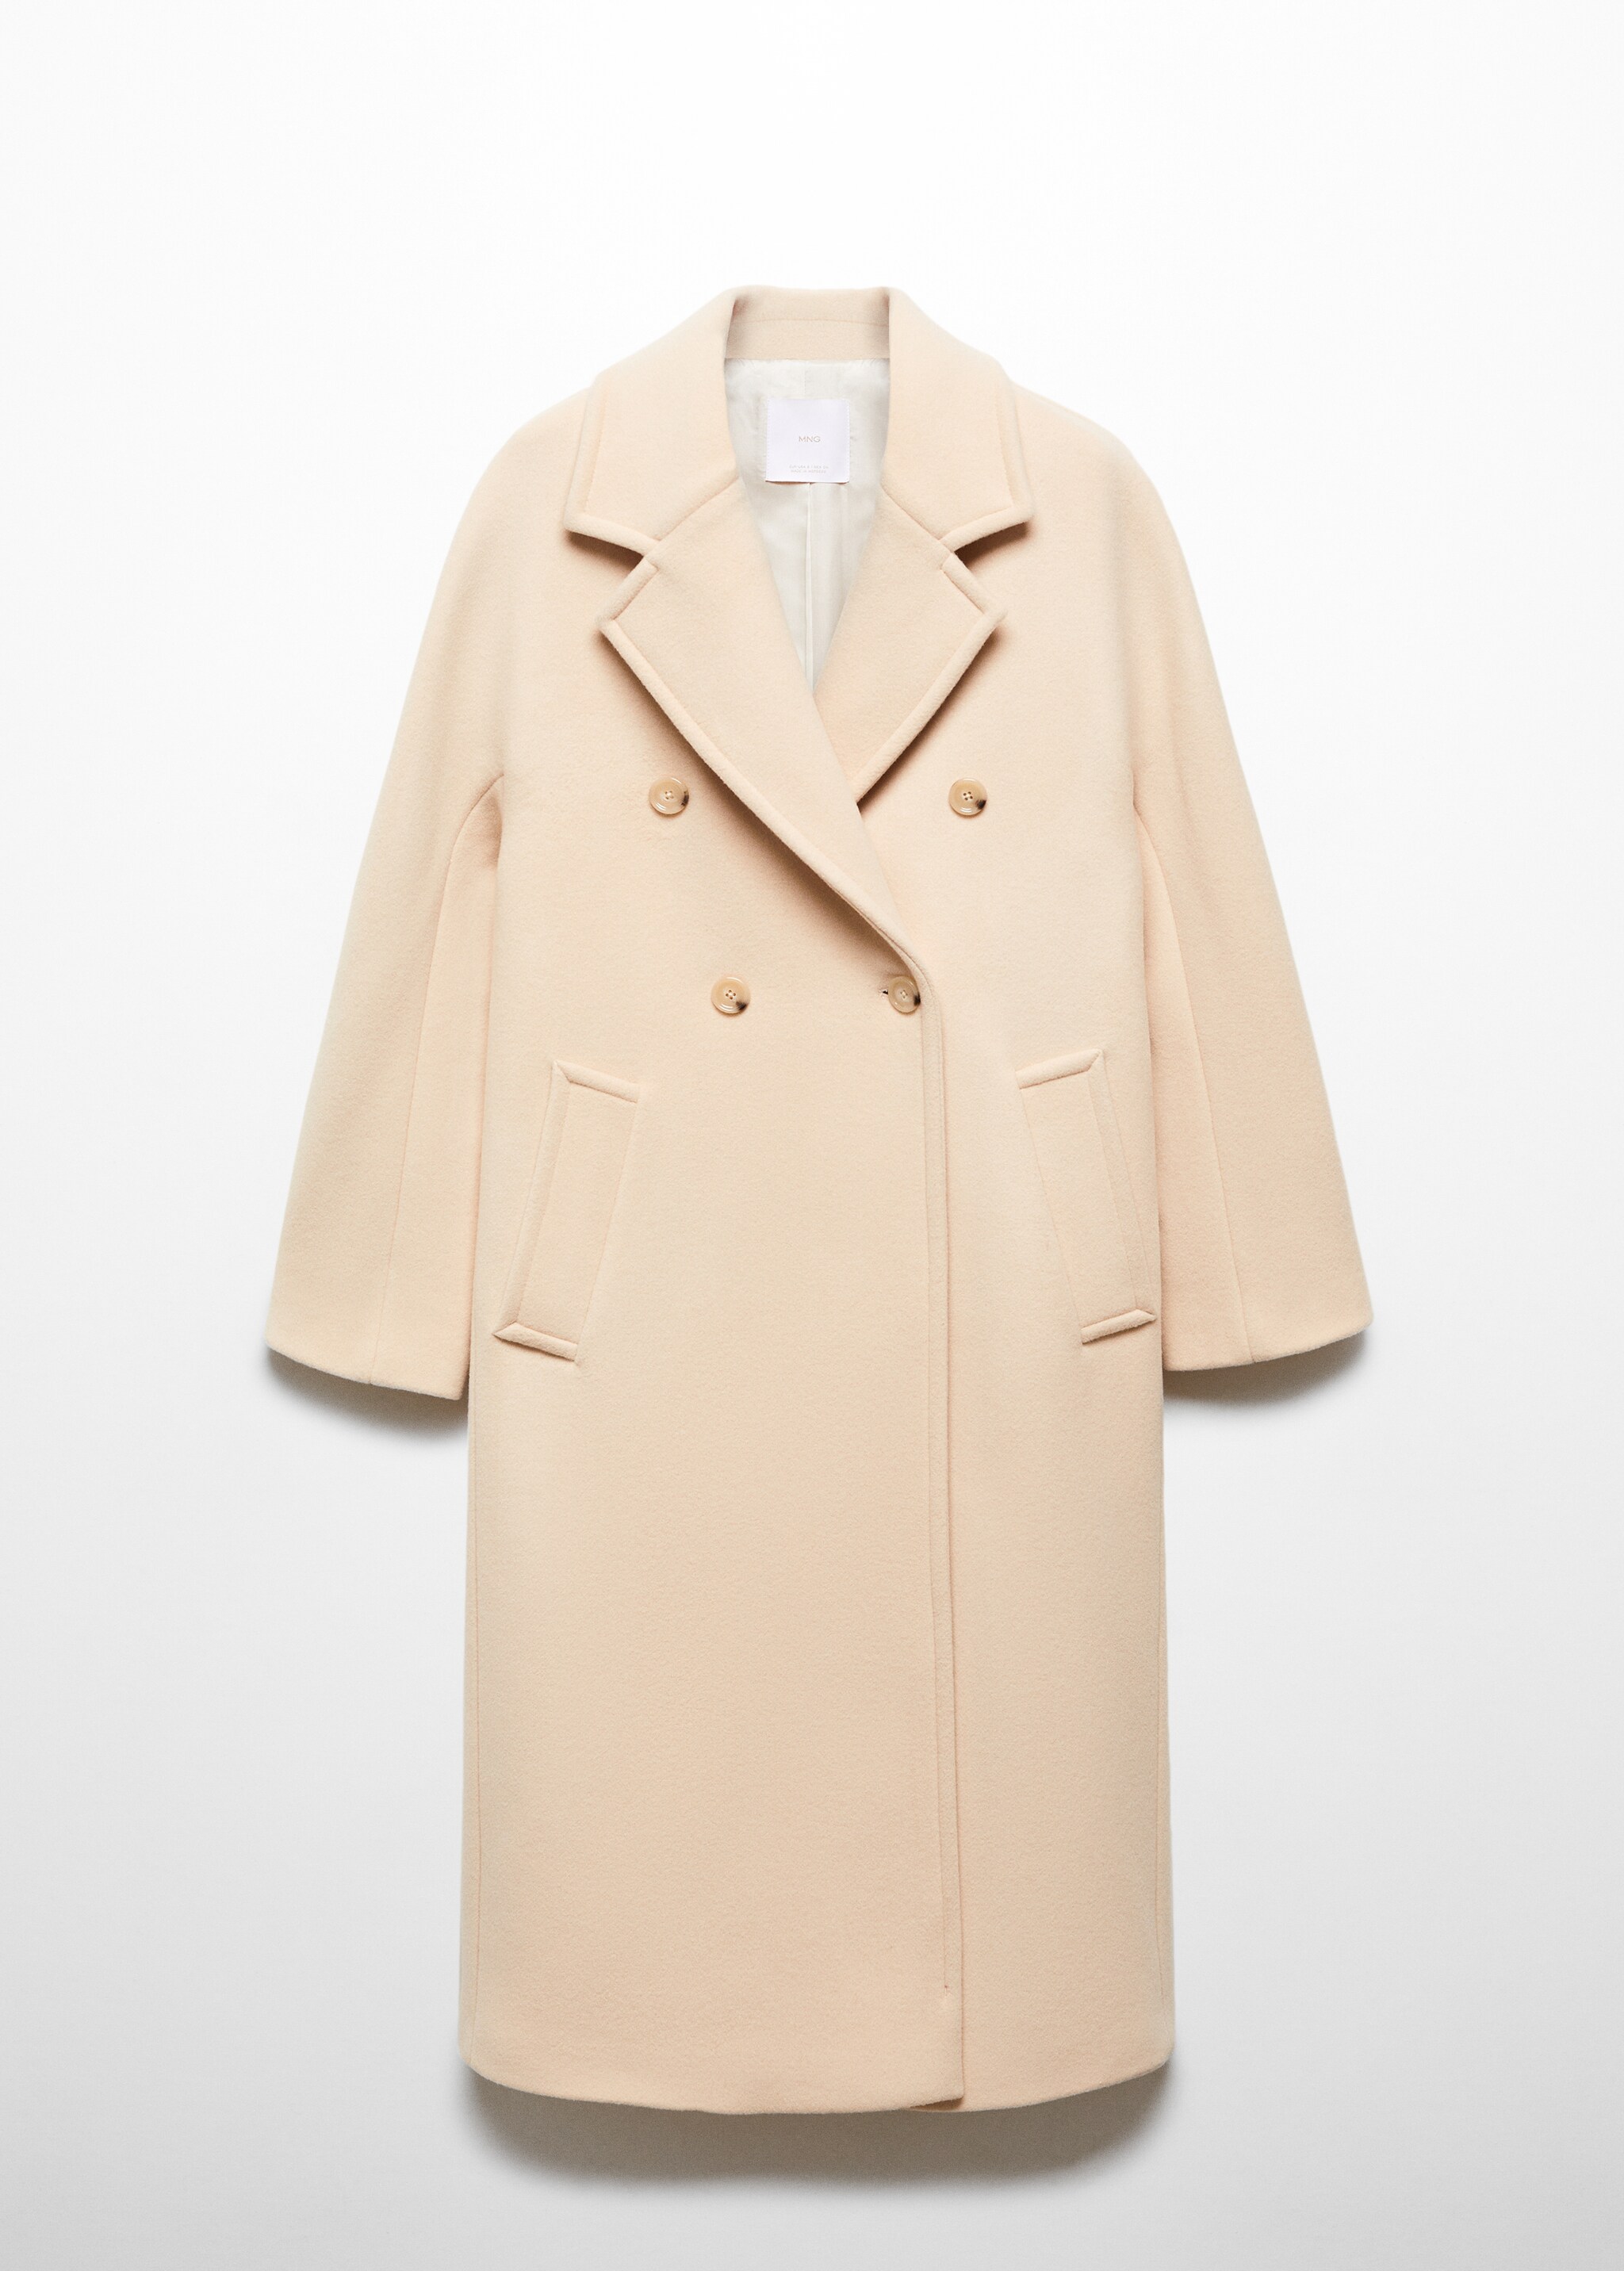 Lapel Manteco wool coat - Article without model